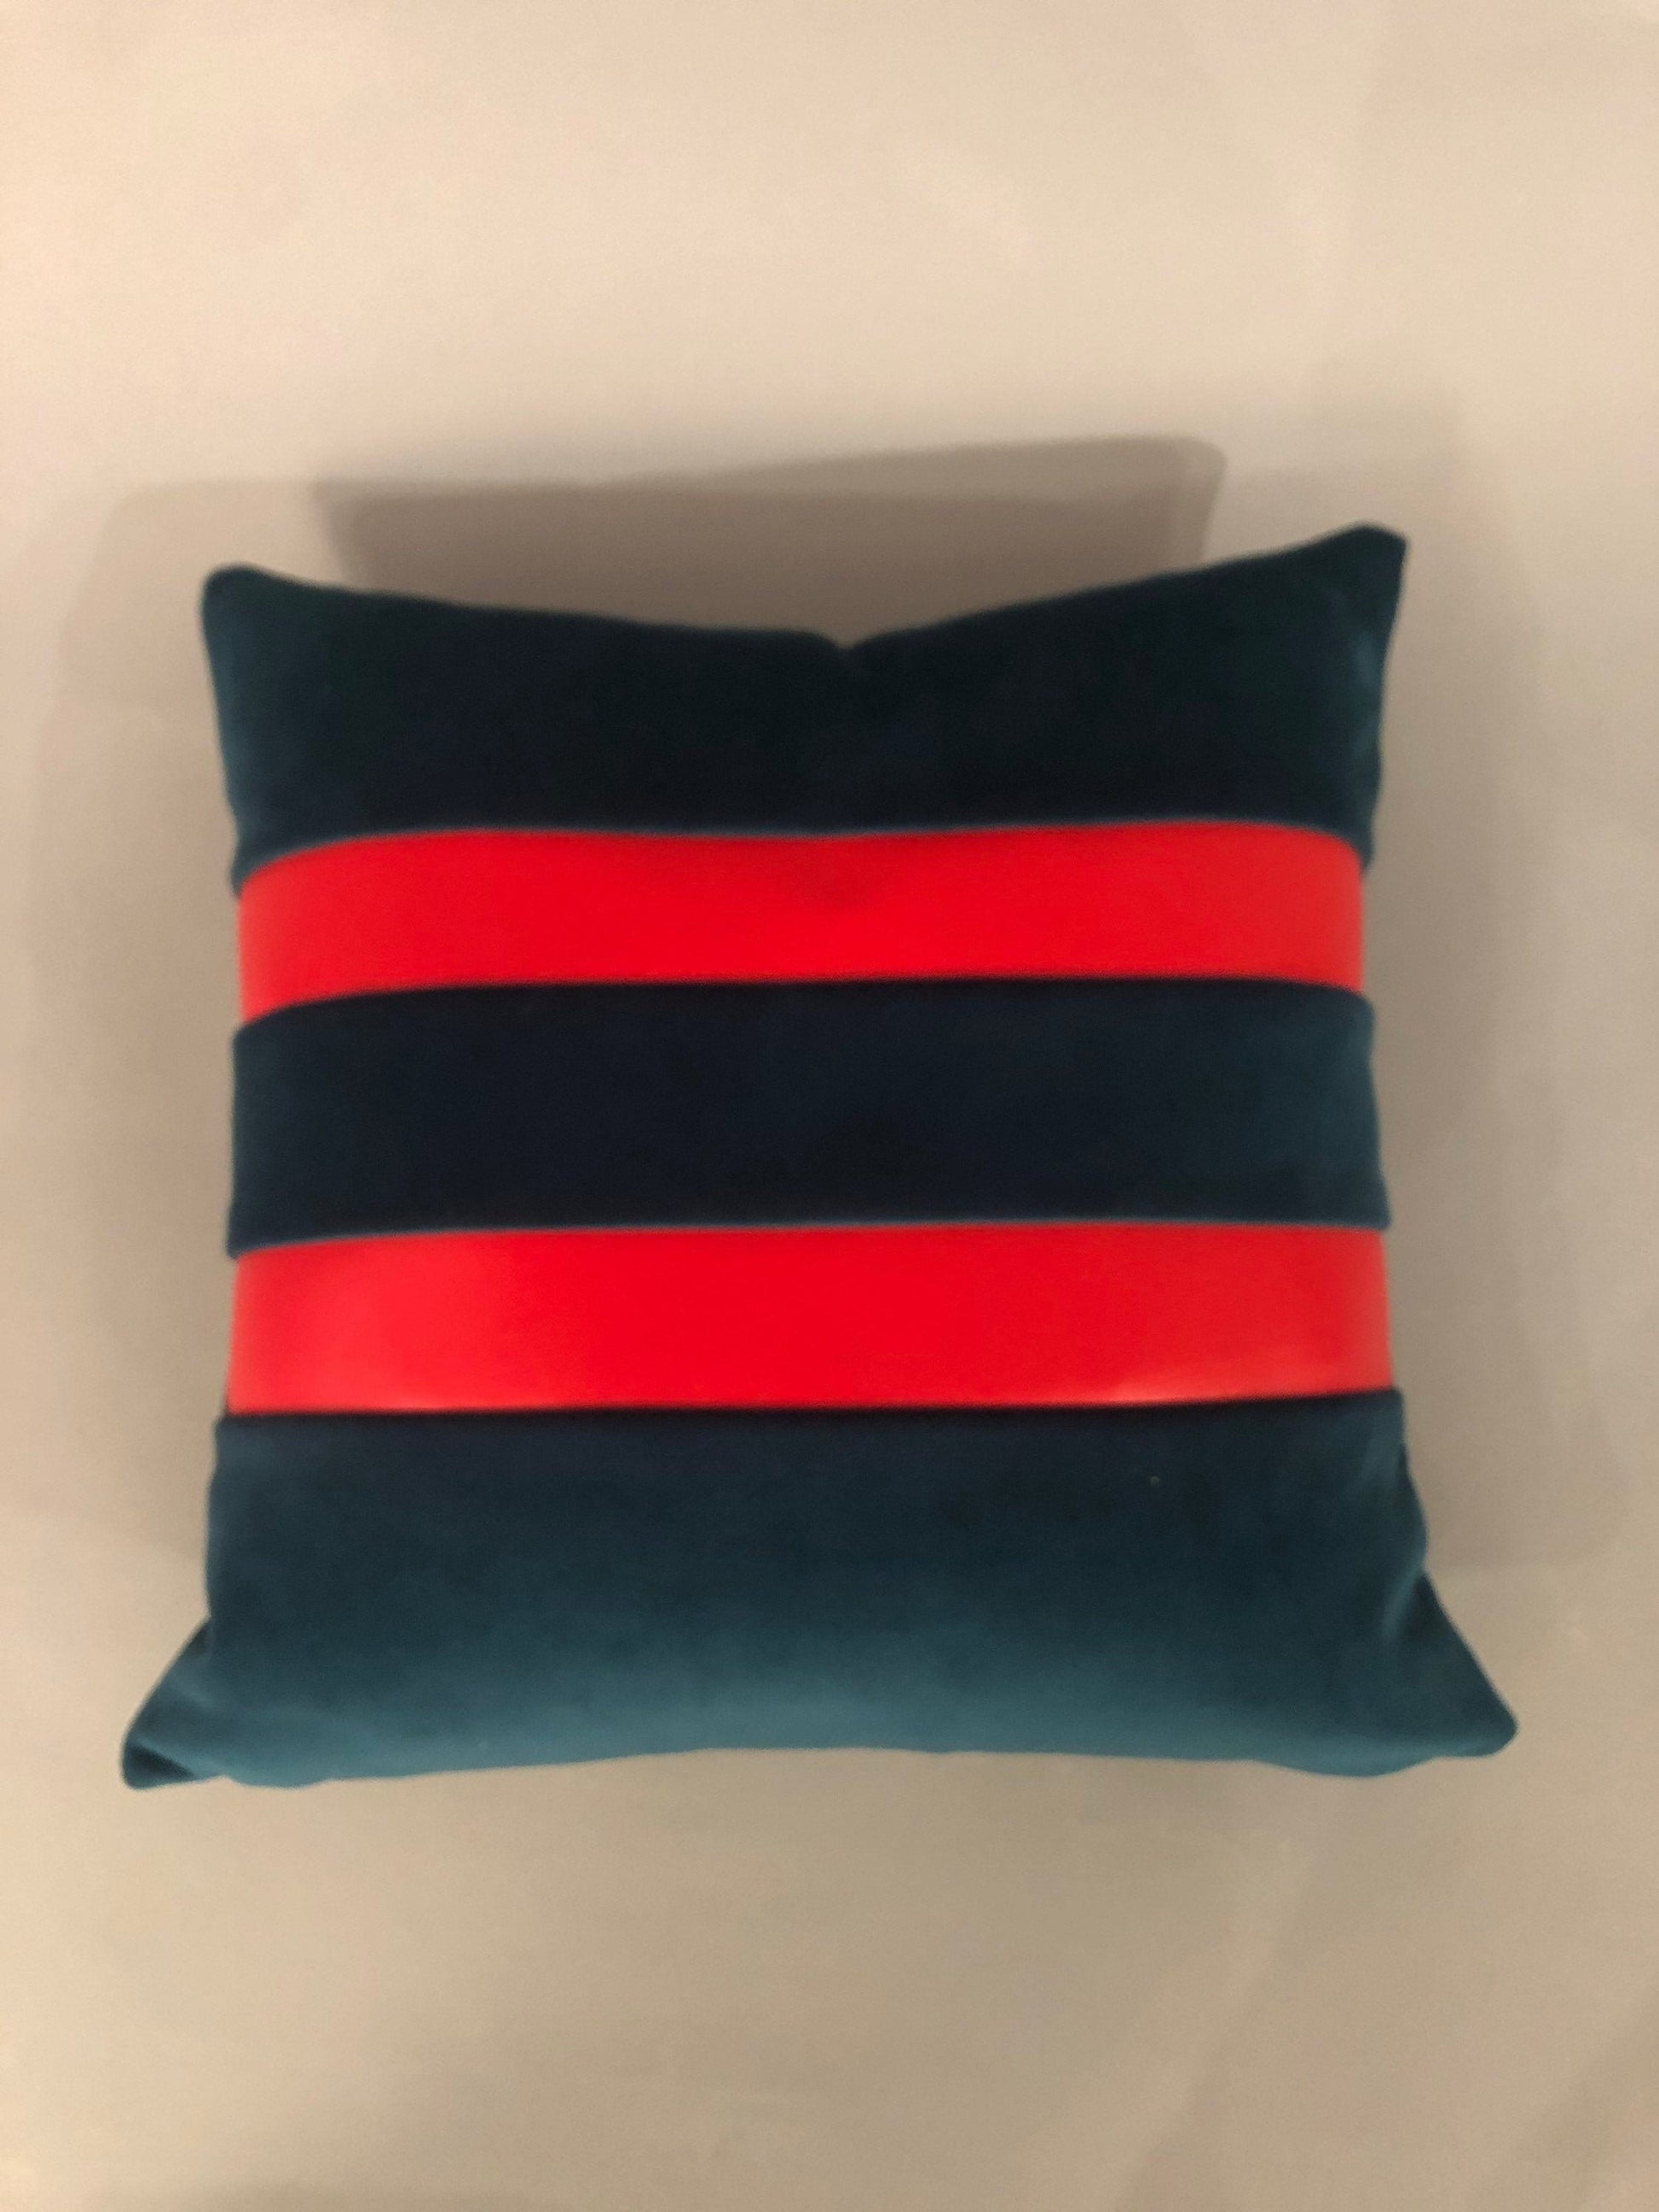 Contemporary handmade velvet blue teal pillow with two red vinyl stripes on one side 17” x 17” inches